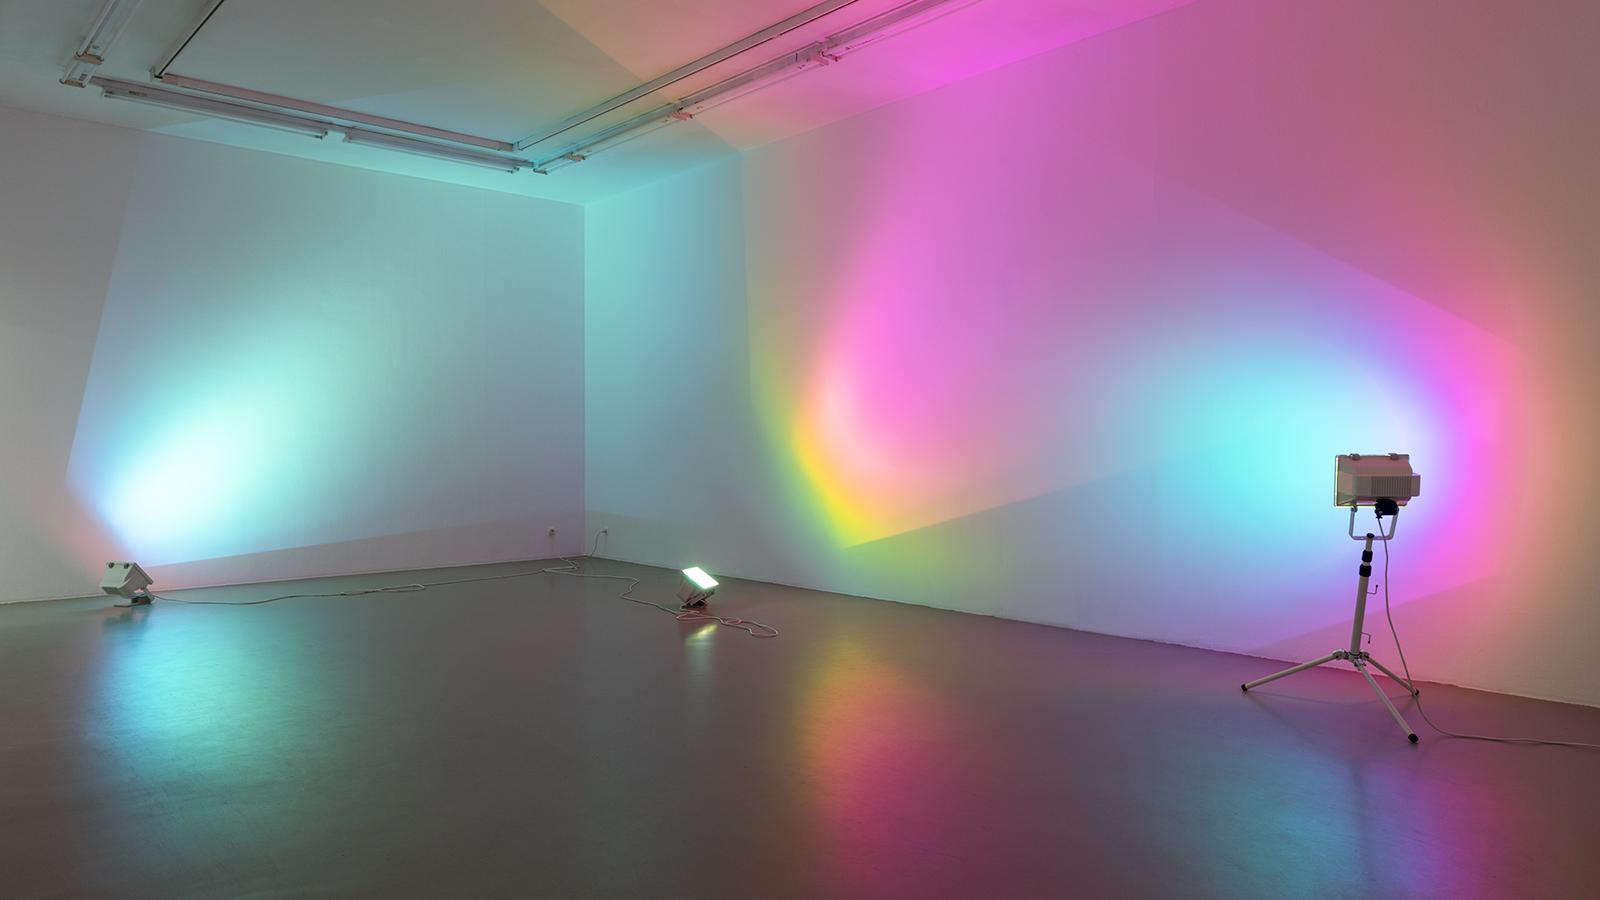 Ann Veronica Janssens, Hot Pink Turquoise, 2006, image by Andrea Rossetti and the courtesy is Esther Schipper, Berlin